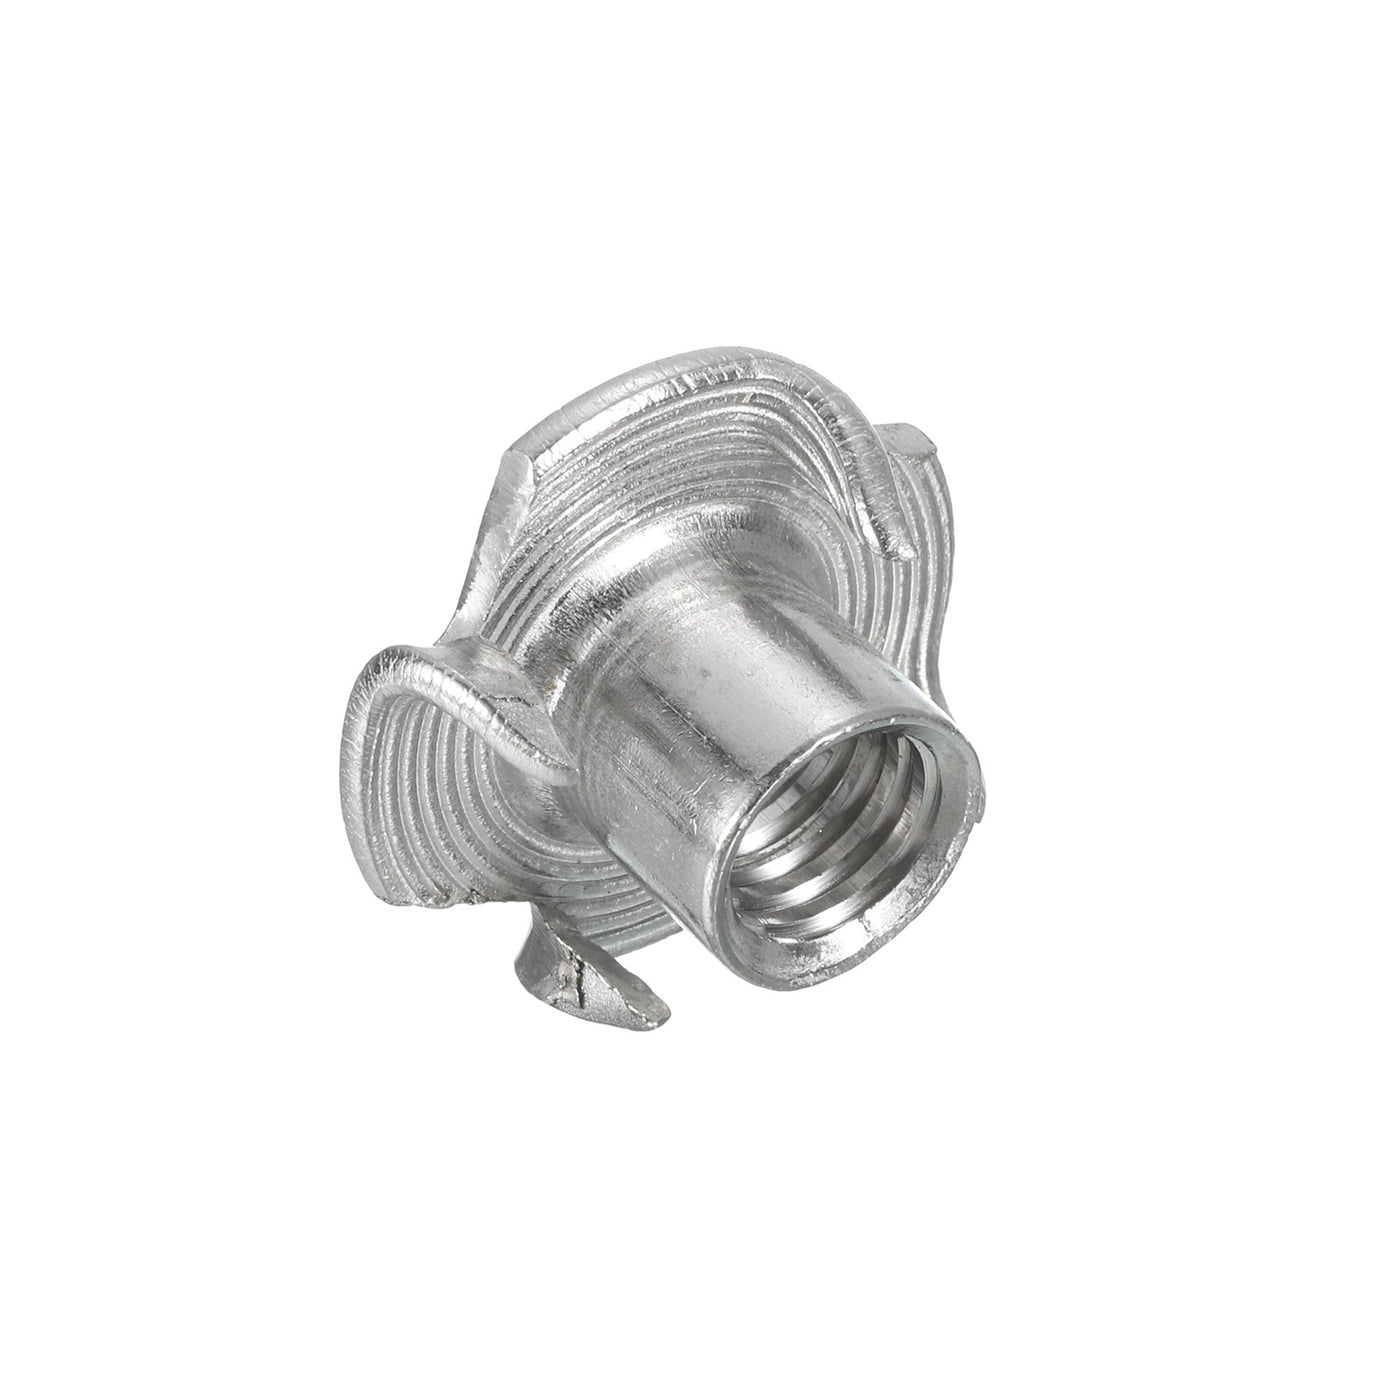 uxcell Uxcell 3/8"-16 T-nut 25pcs 304 Stainless Steel 4 Pronged Tee Nuts Threaded Insertion